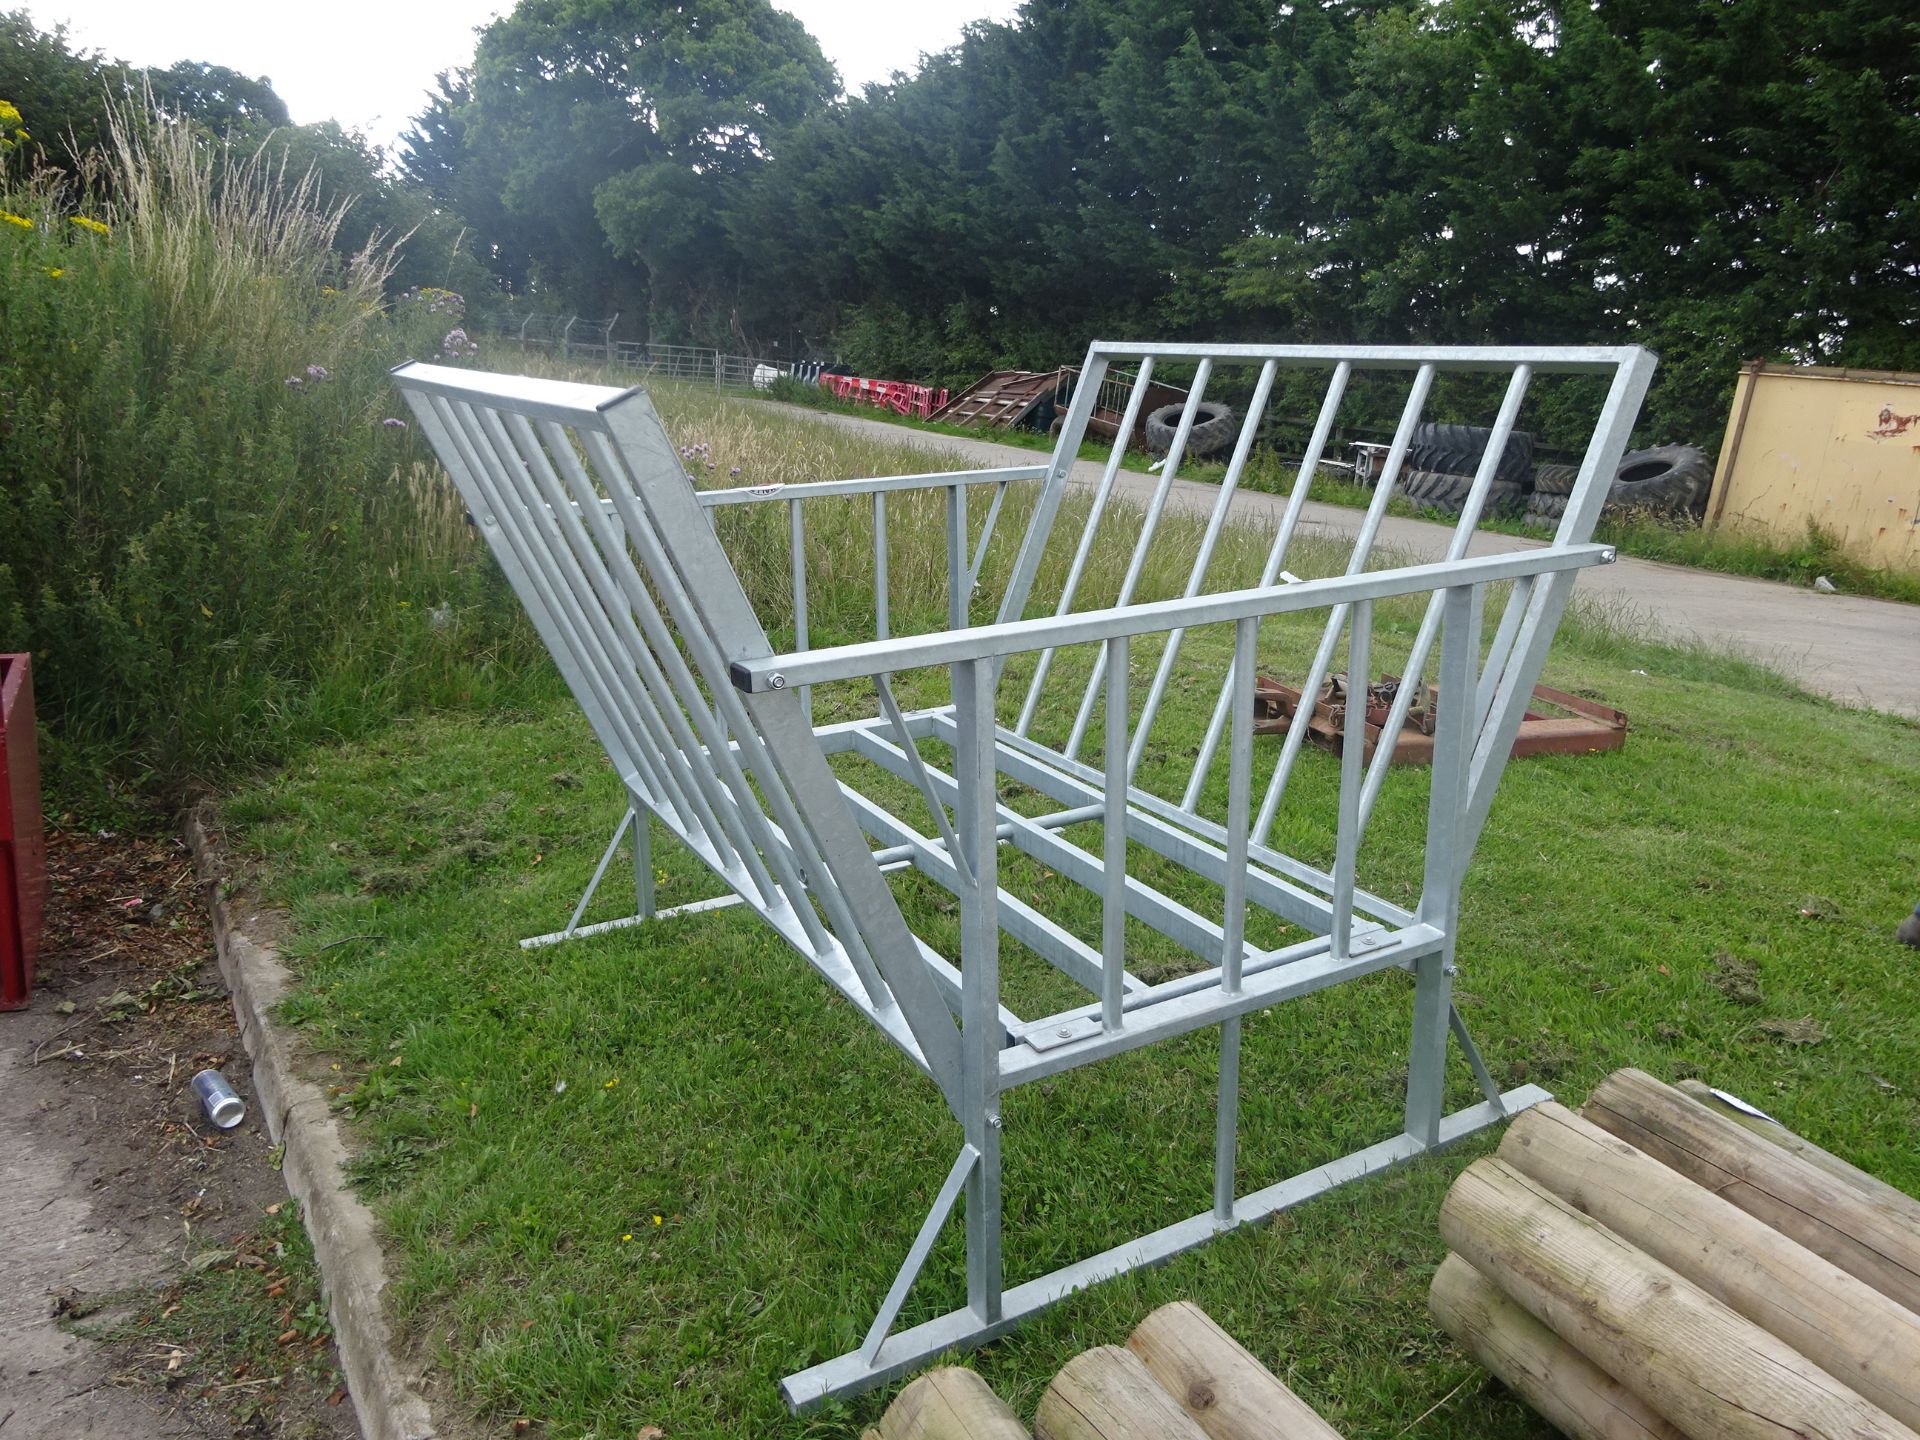 CATTLE FEED CRADLE